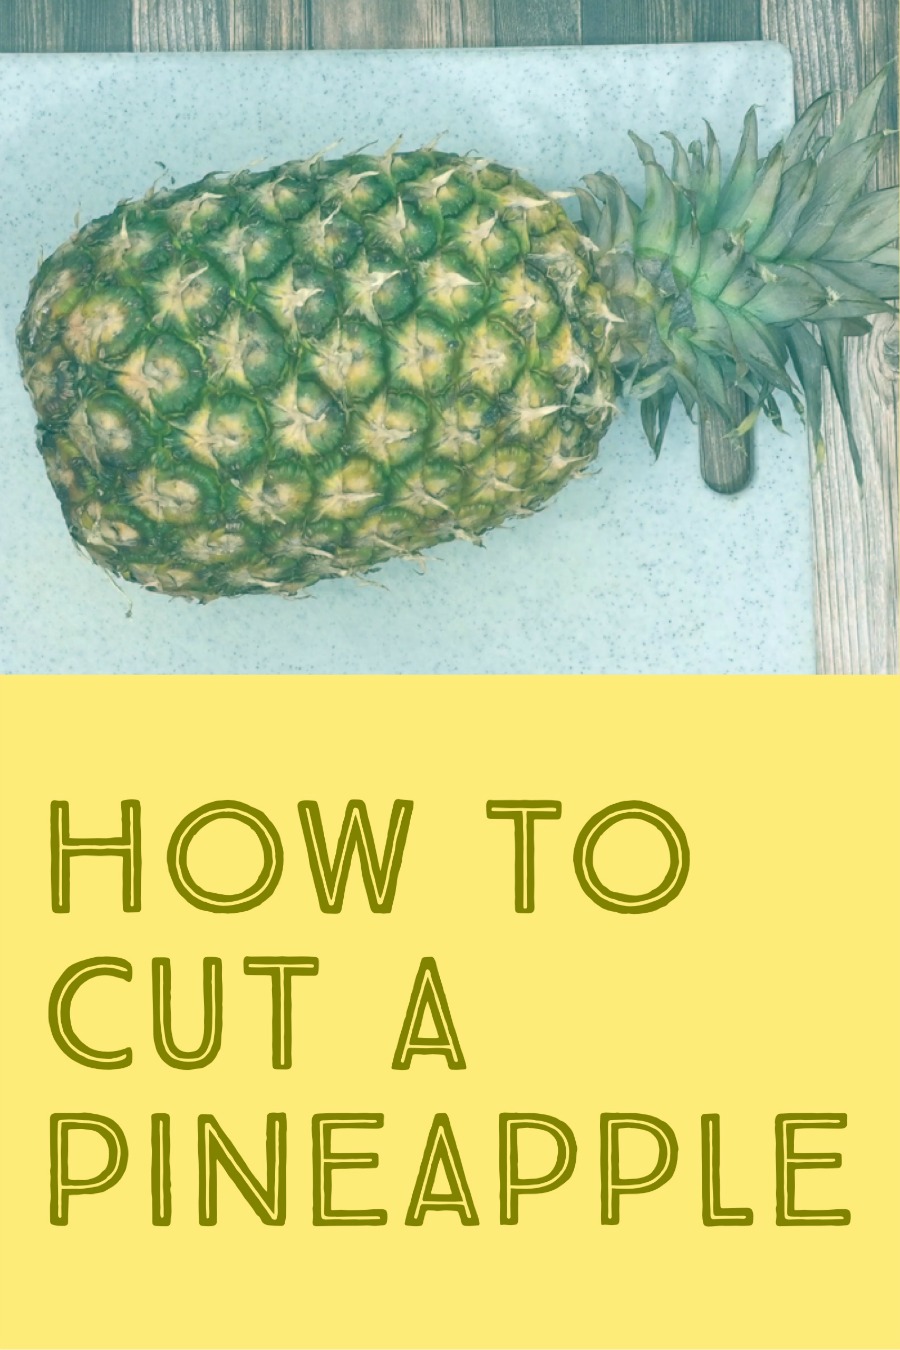 How to cut a pineapple video